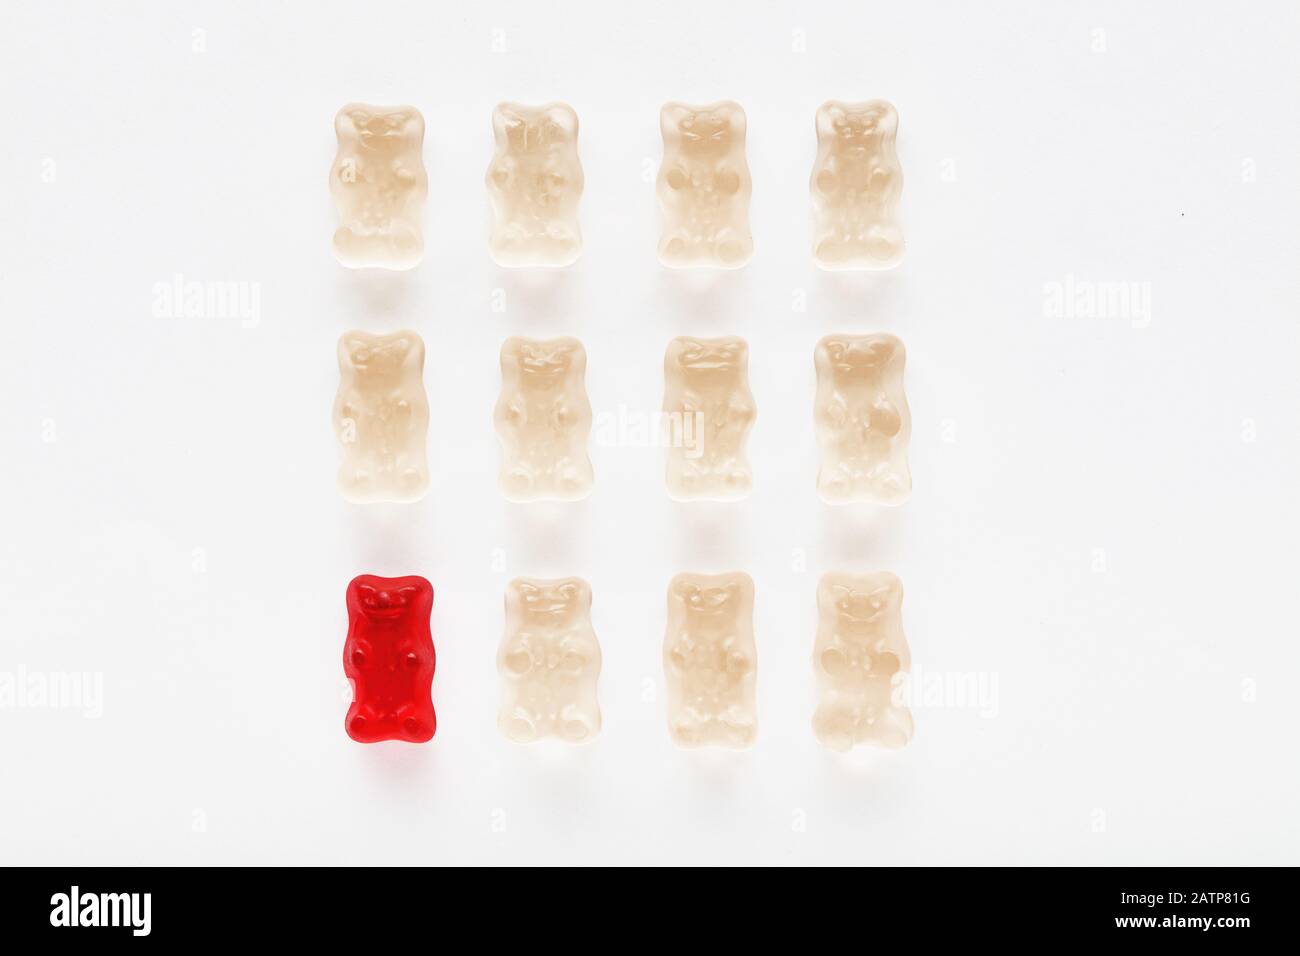 Red gummy bear standing out of the crowd with its distinctive color. Diversity and difference Stock Photo